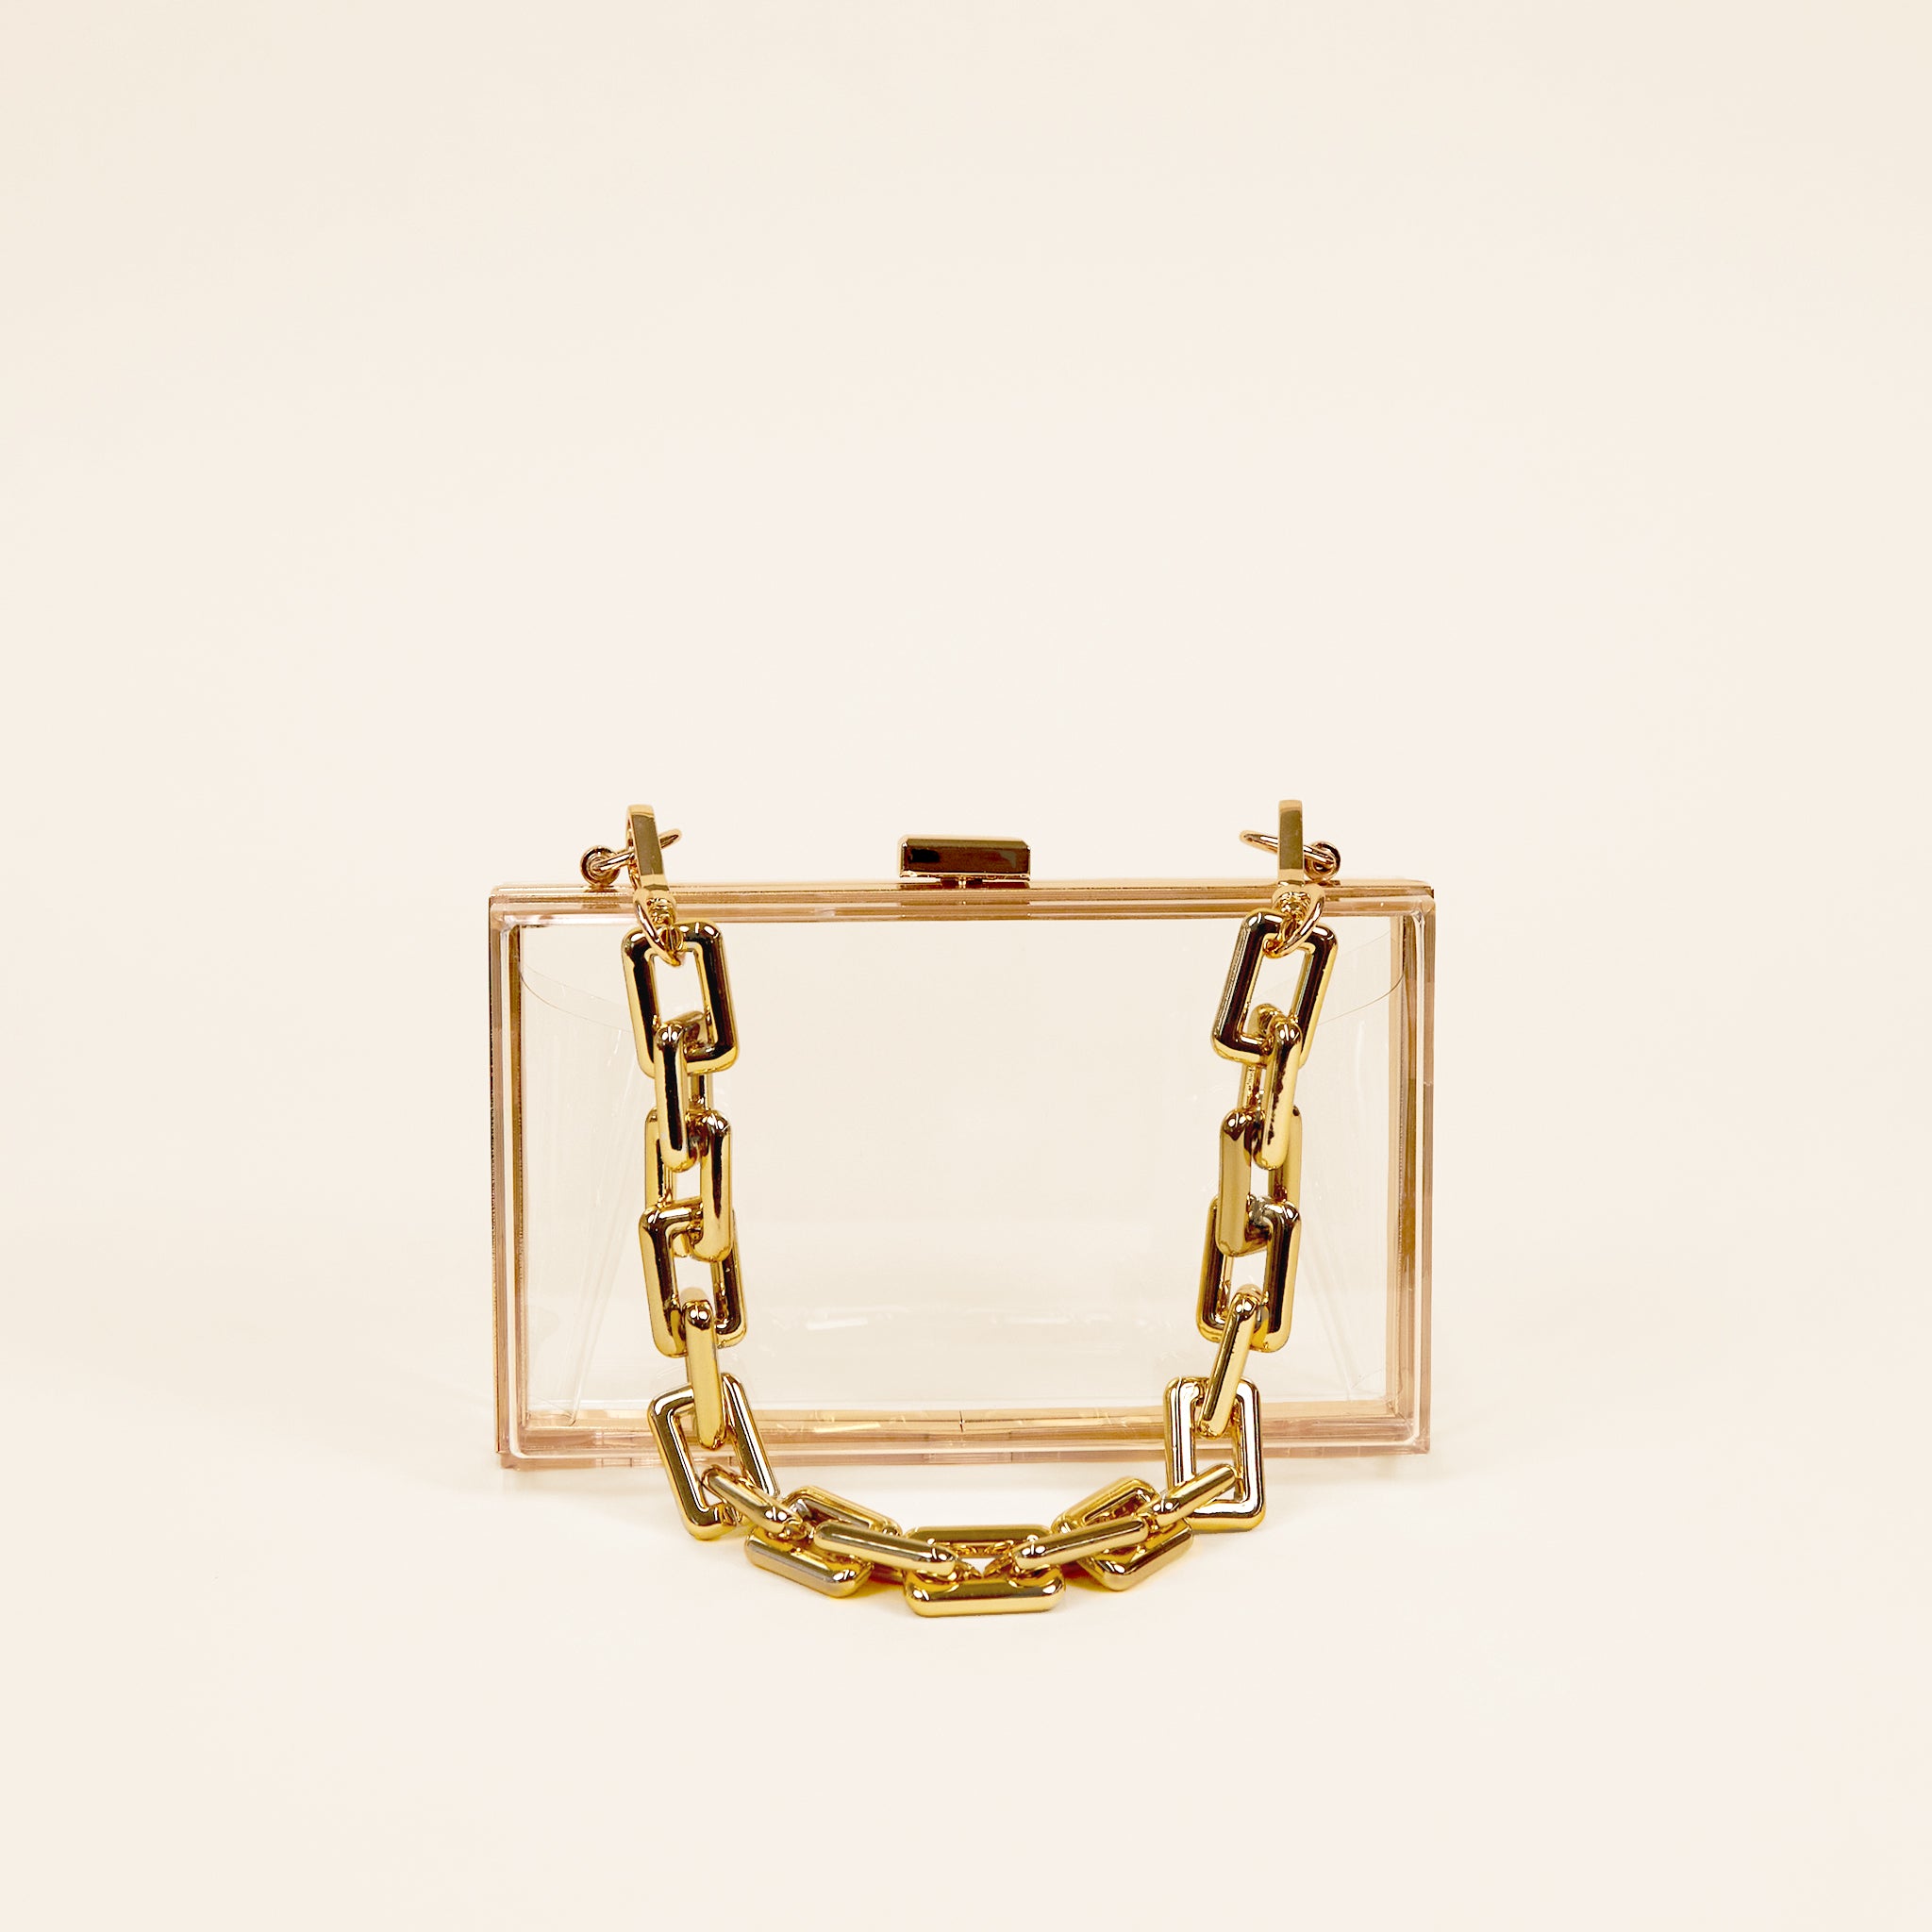 Clear Clutch with Gold Chain